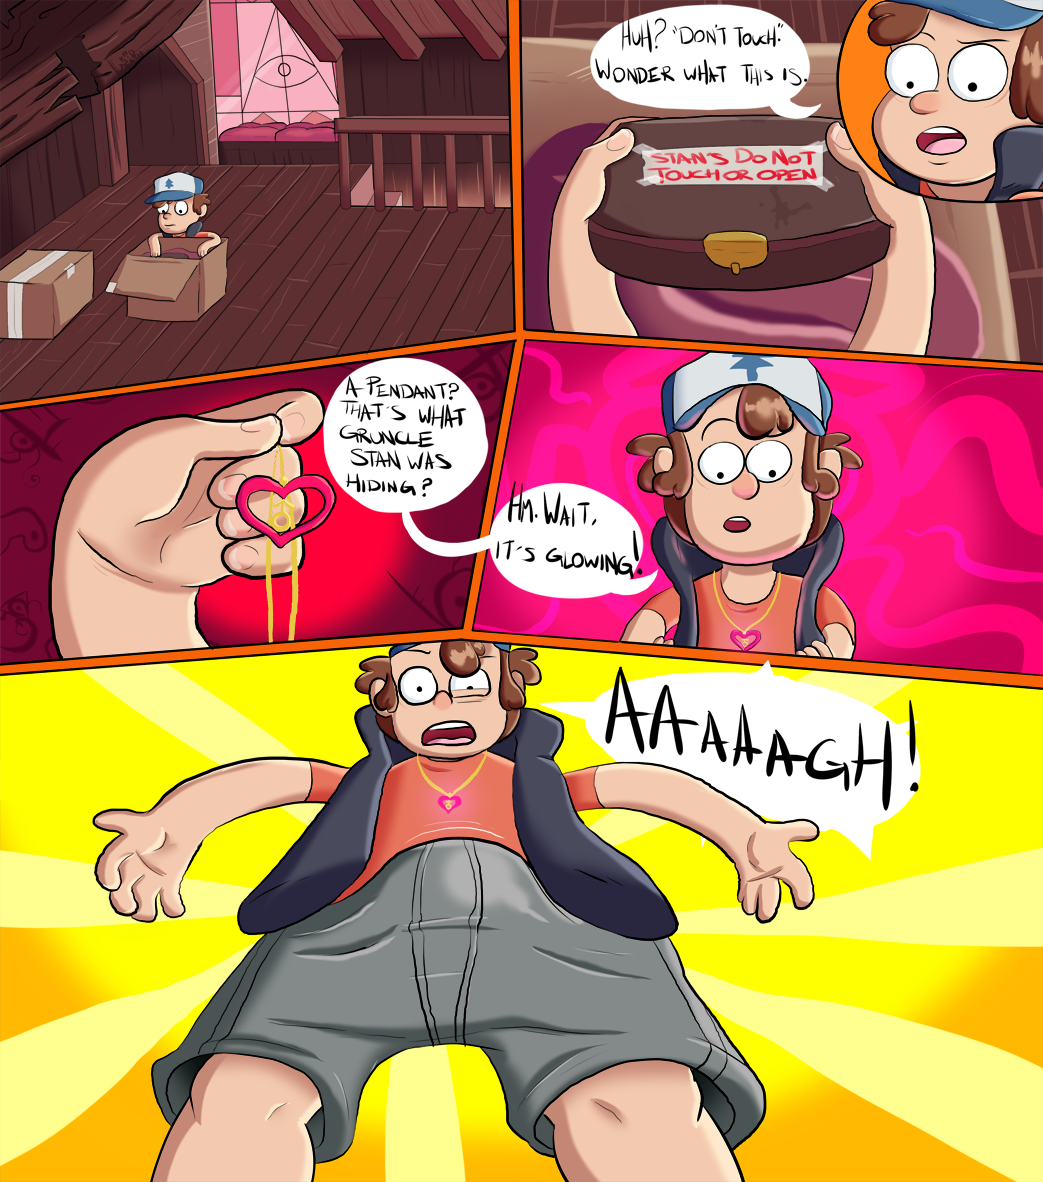 gotofap__Grabba-These-Balls-Pining-For-Dipper-01_3145590901.png